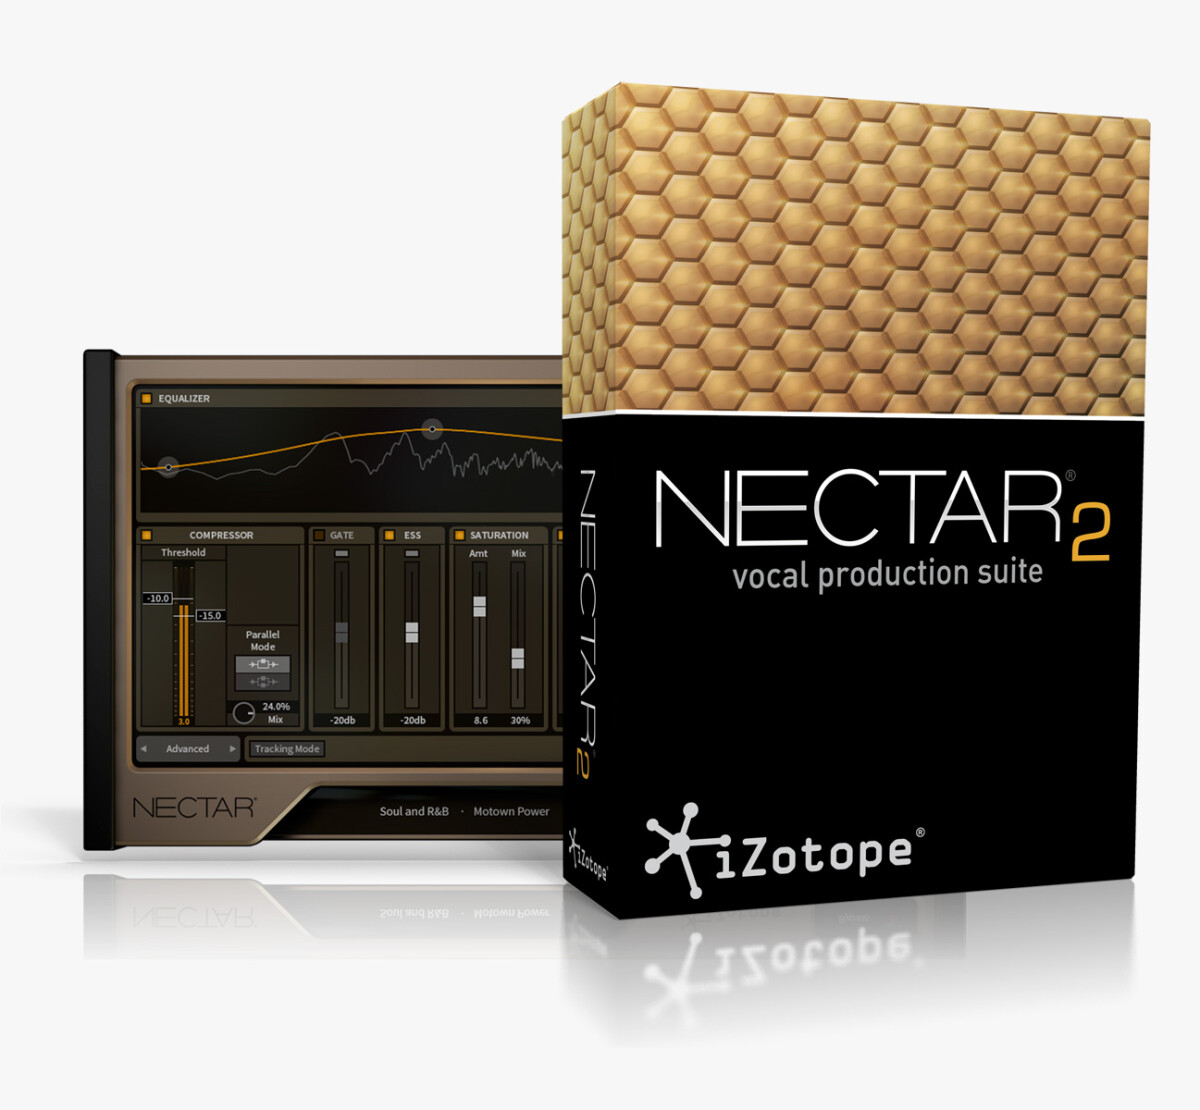 iZotope Nectar 2 now available